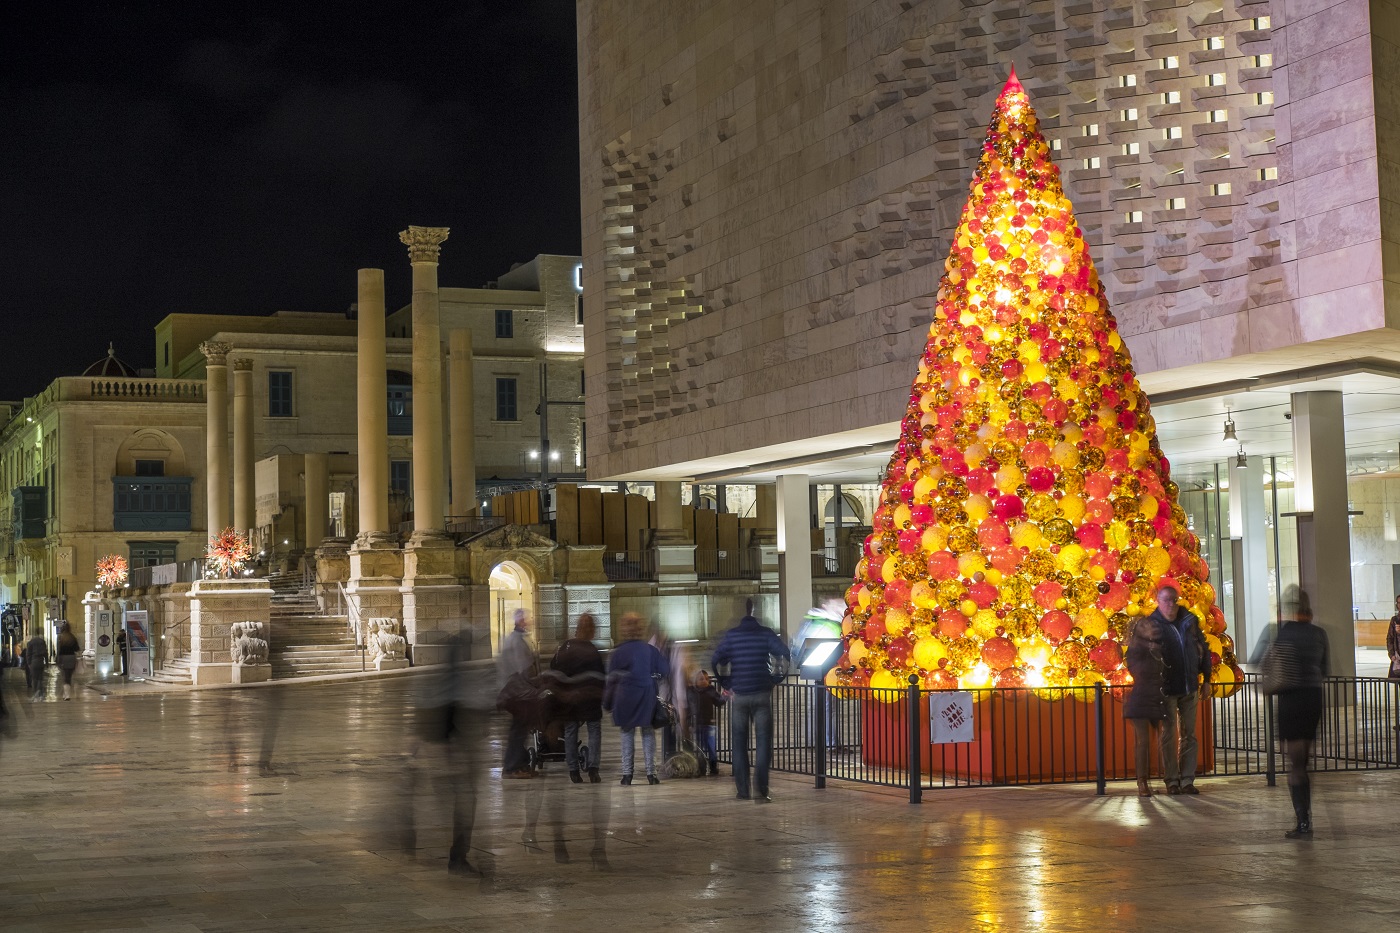 The large Christmas tree in front of Parliament building with other Christmas installation (also by Mdina Glass) in background at Pjazza Teatru Rjal.